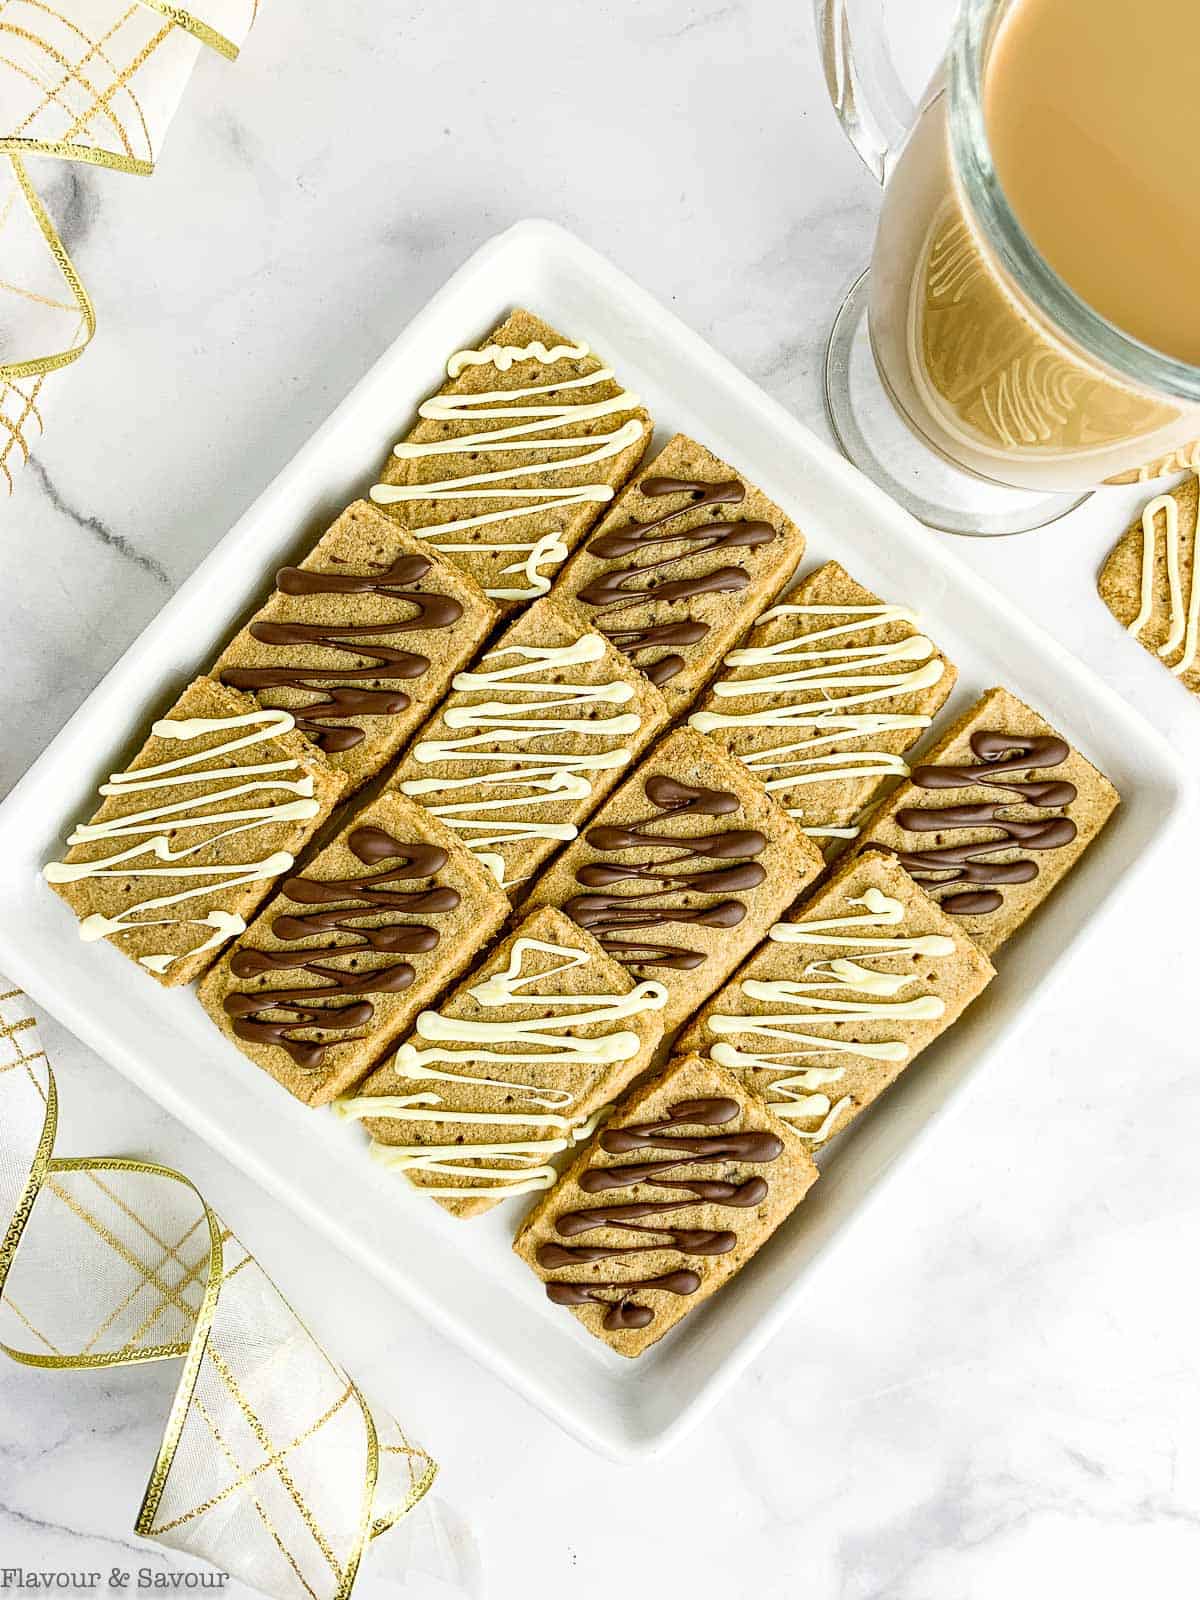 Overhead view of chocolate drizzled espresso shortbread cookies with a cup of coffee.